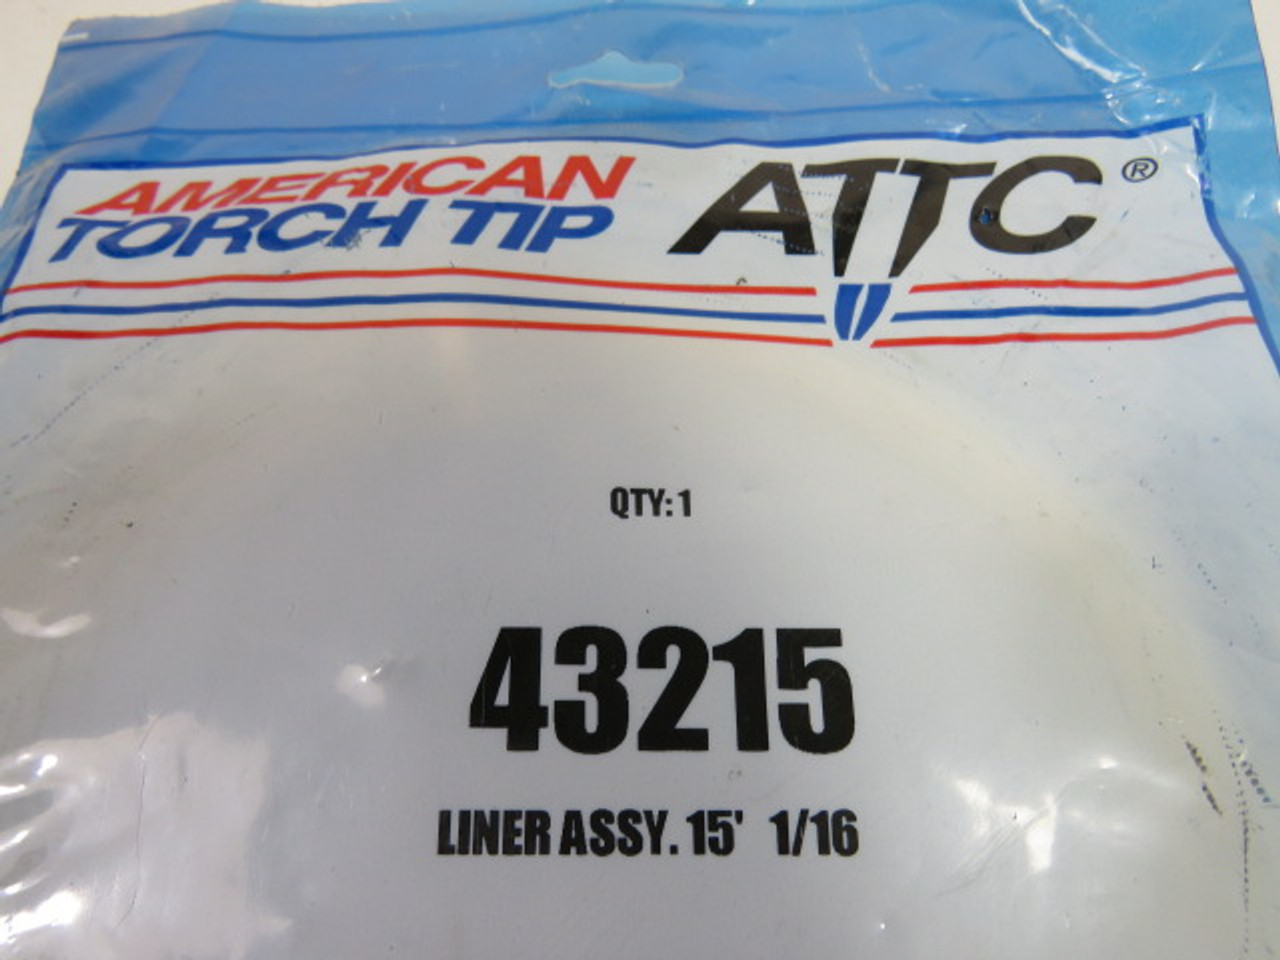 ATTC 43215 Liner Assembly 15' 1/16" Length .075" ID 0175" OD ! NWB !